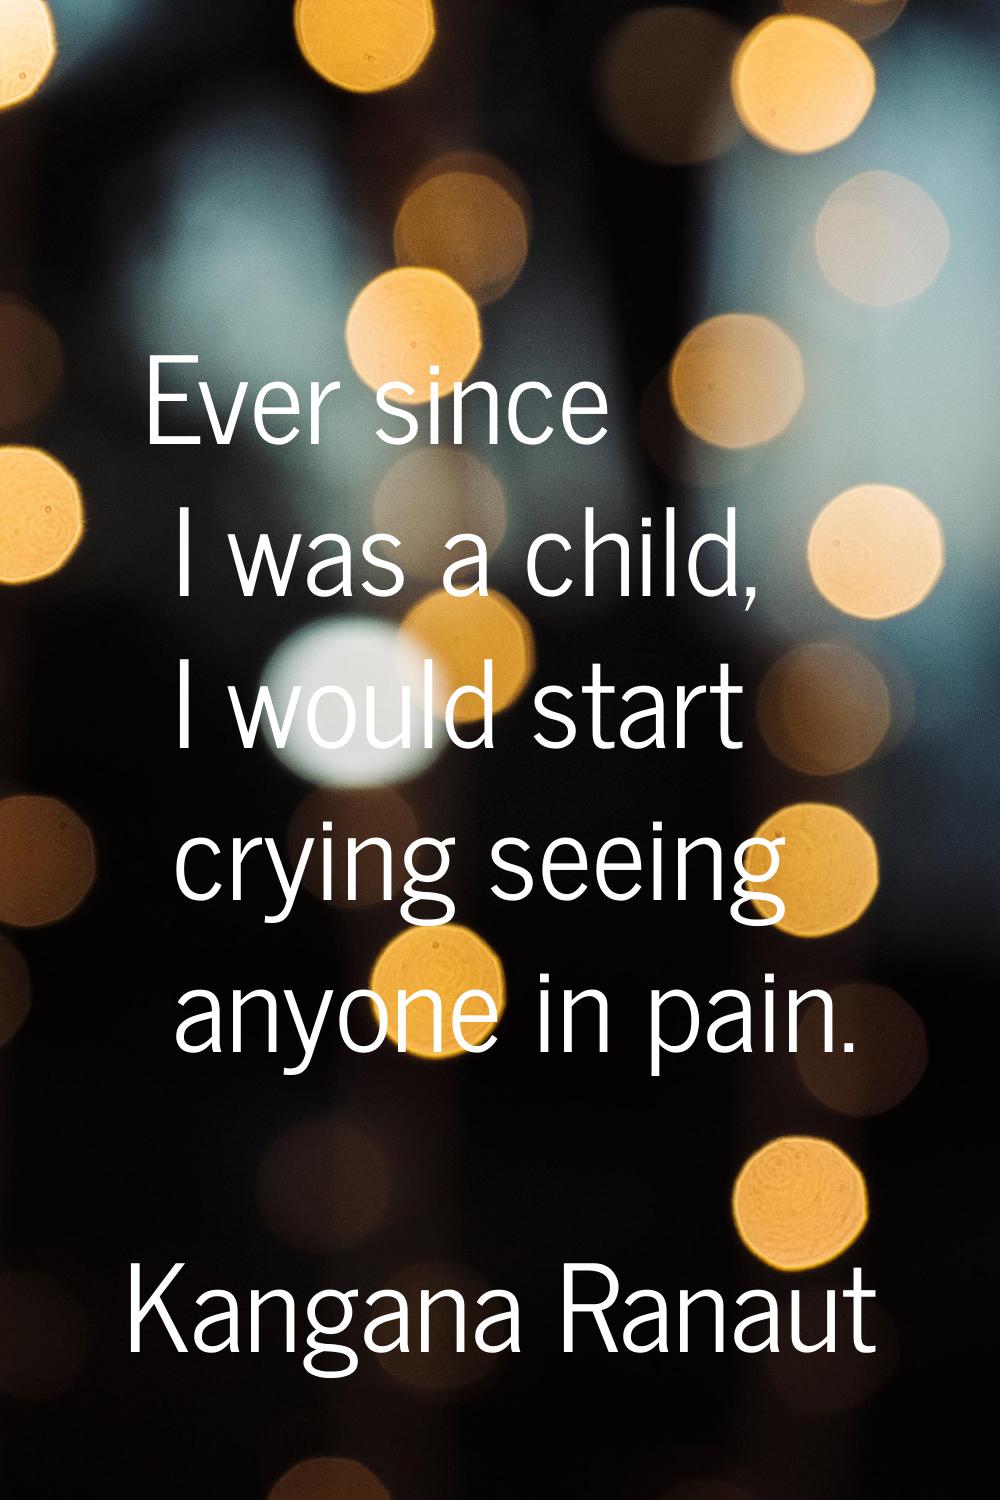 Ever since I was a child, I would start crying seeing anyone in pain.